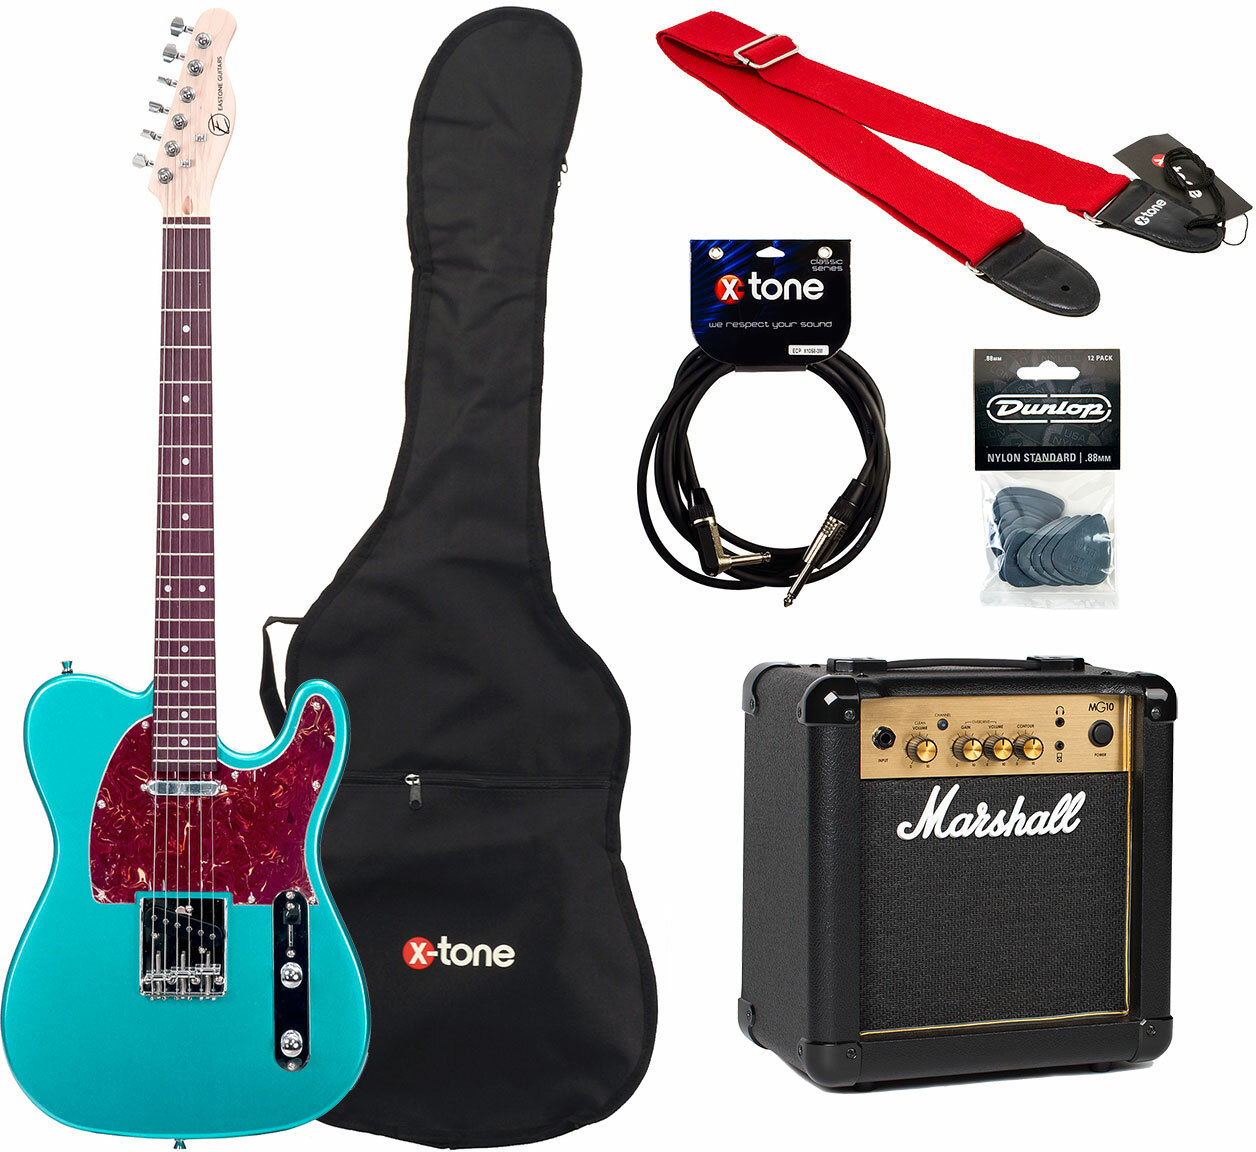 Eastone Tl70 +marshall Mg10 +housse +courroie +cable +mediators - Metallic Light Blue - Electric guitar set - Main picture